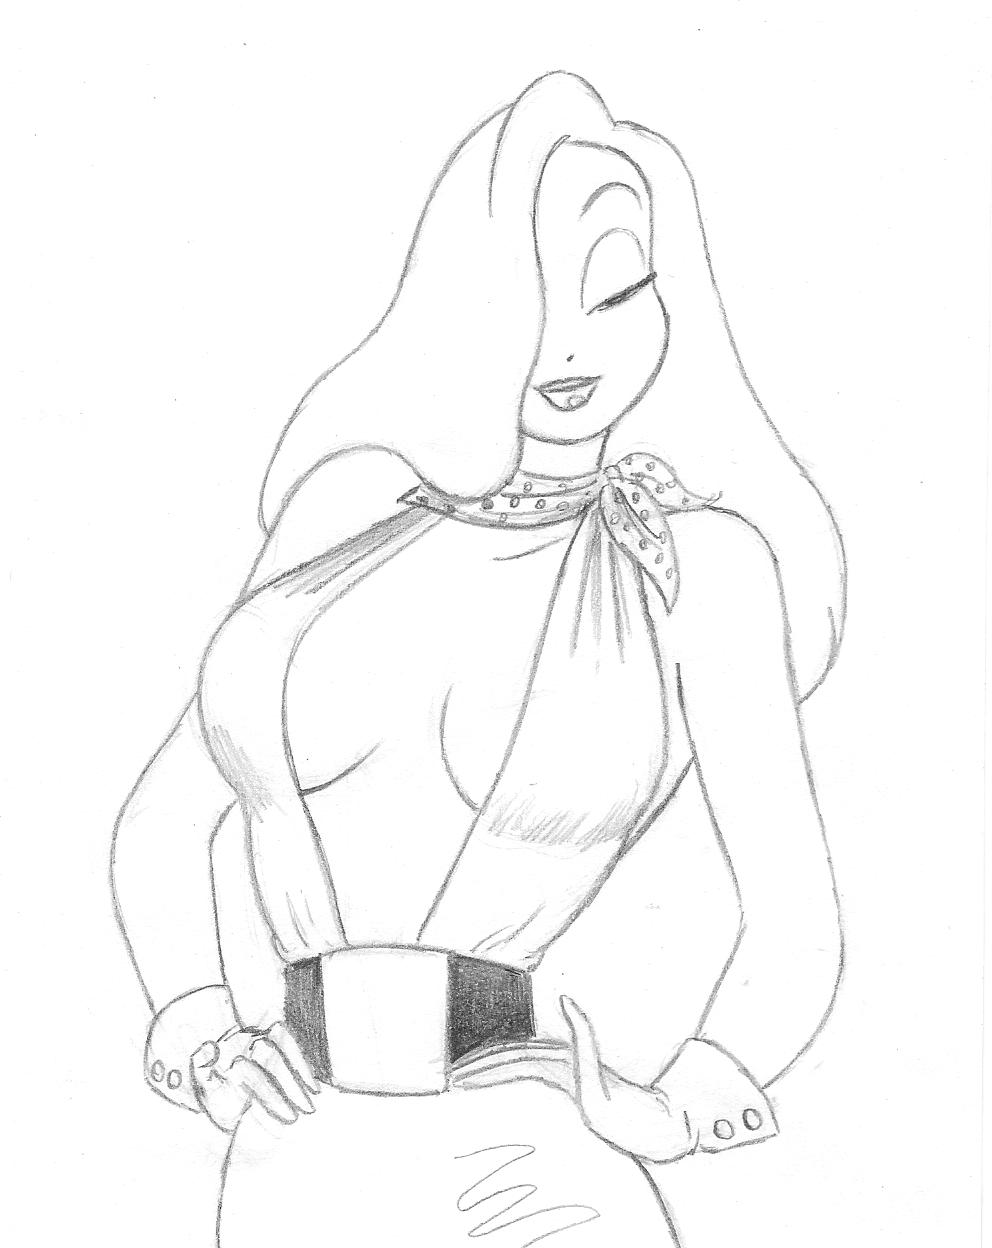 Why, yes, I have drawn Jessica Rabbit.